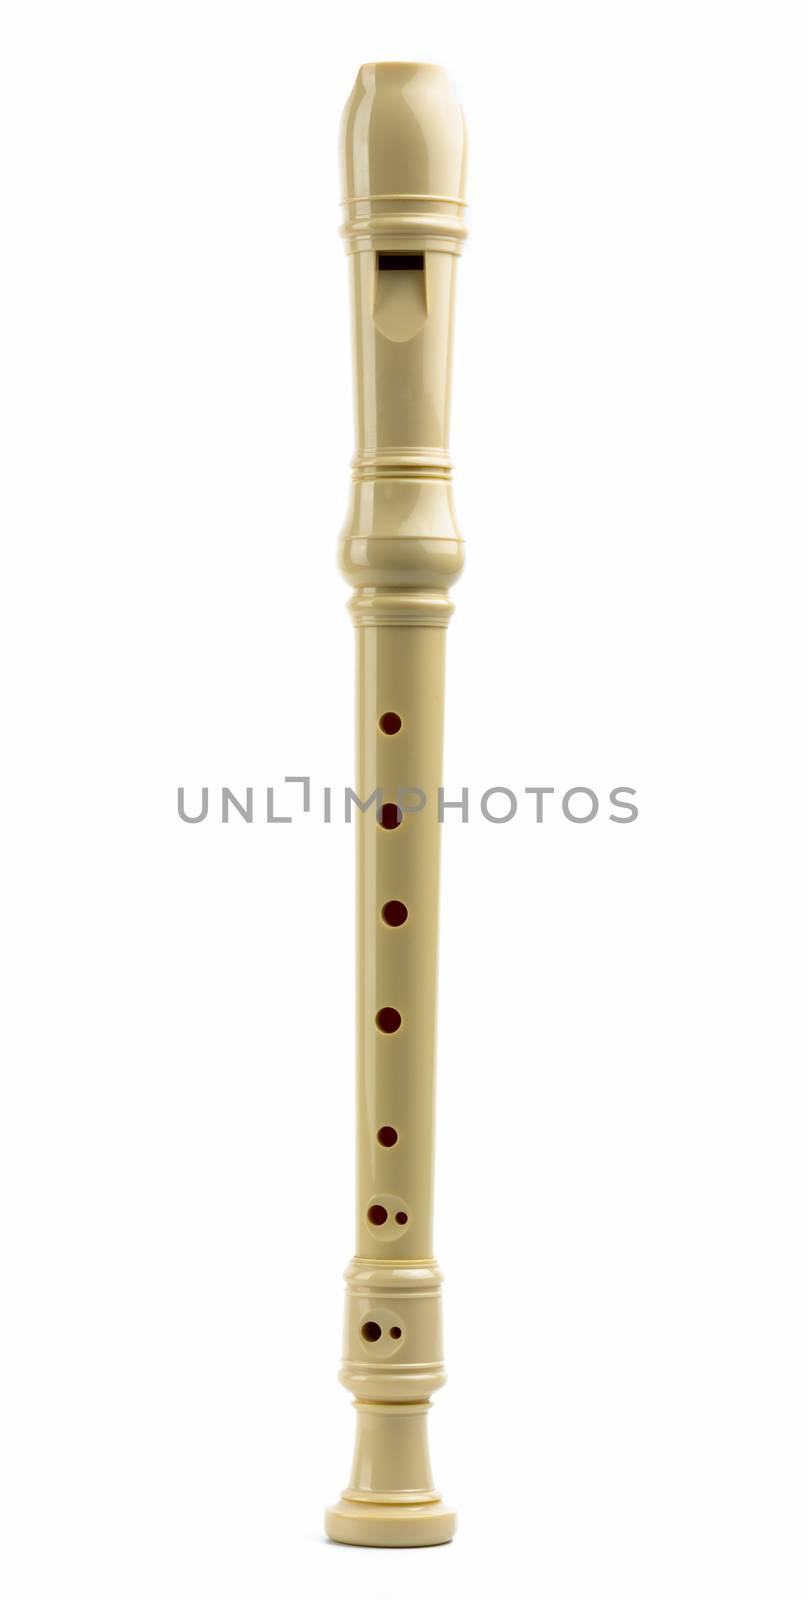 Soprano (Descant) recorder. Plastic recorder flute isolated on white background with copy space for text. Classical Baroque music instruments. Education on music class. by Fahroni